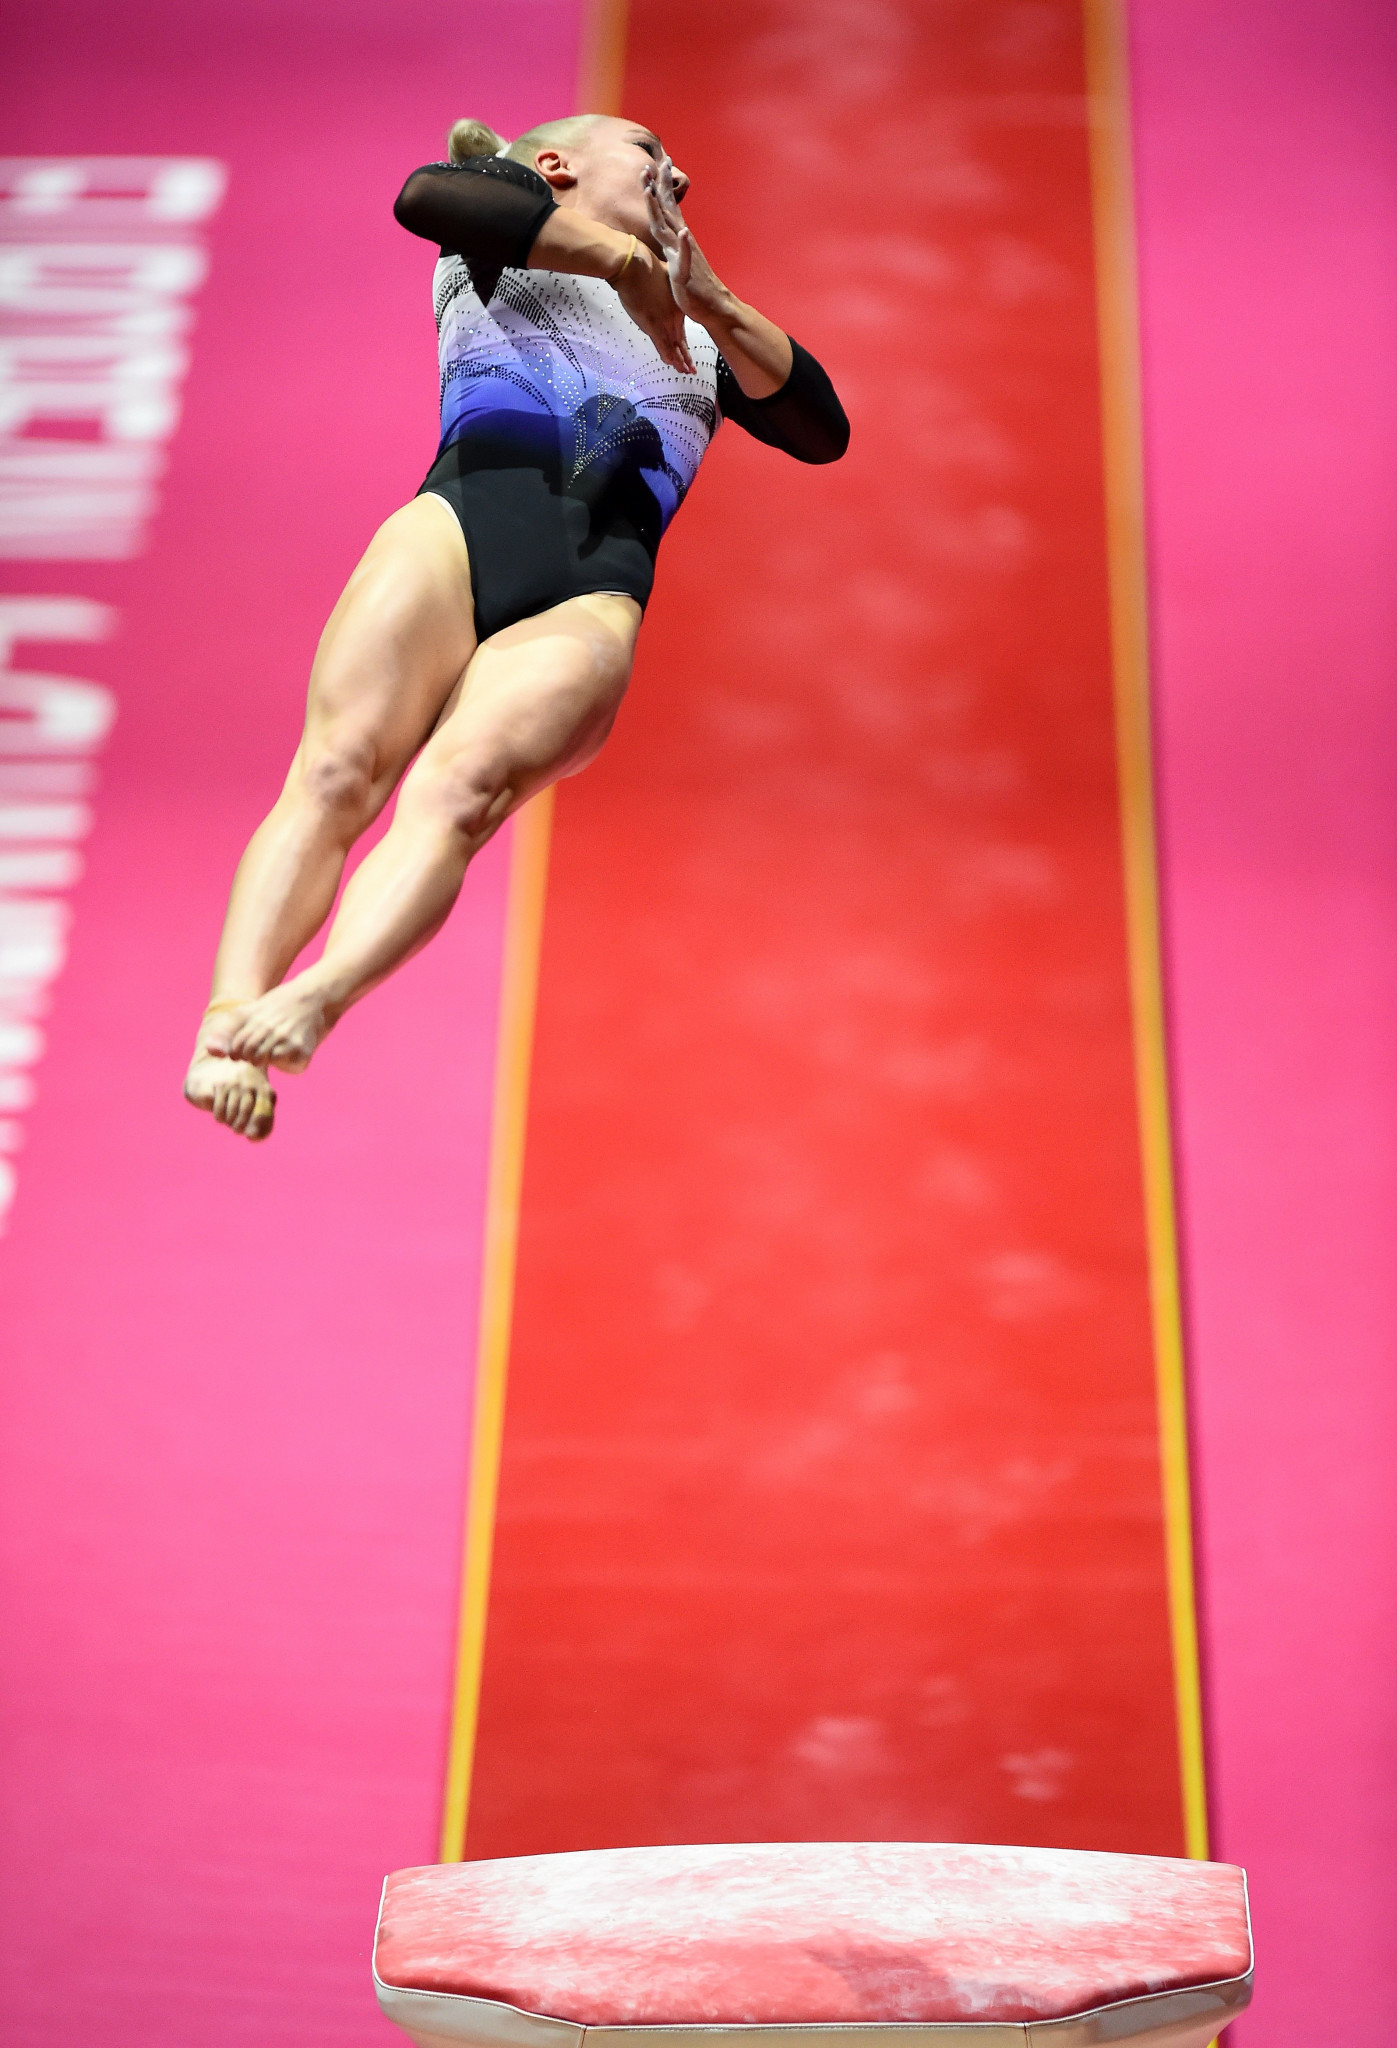 Hungary's Boglárka Dévai claimed her first-ever European title with victory in the women's vault ©Getty Images